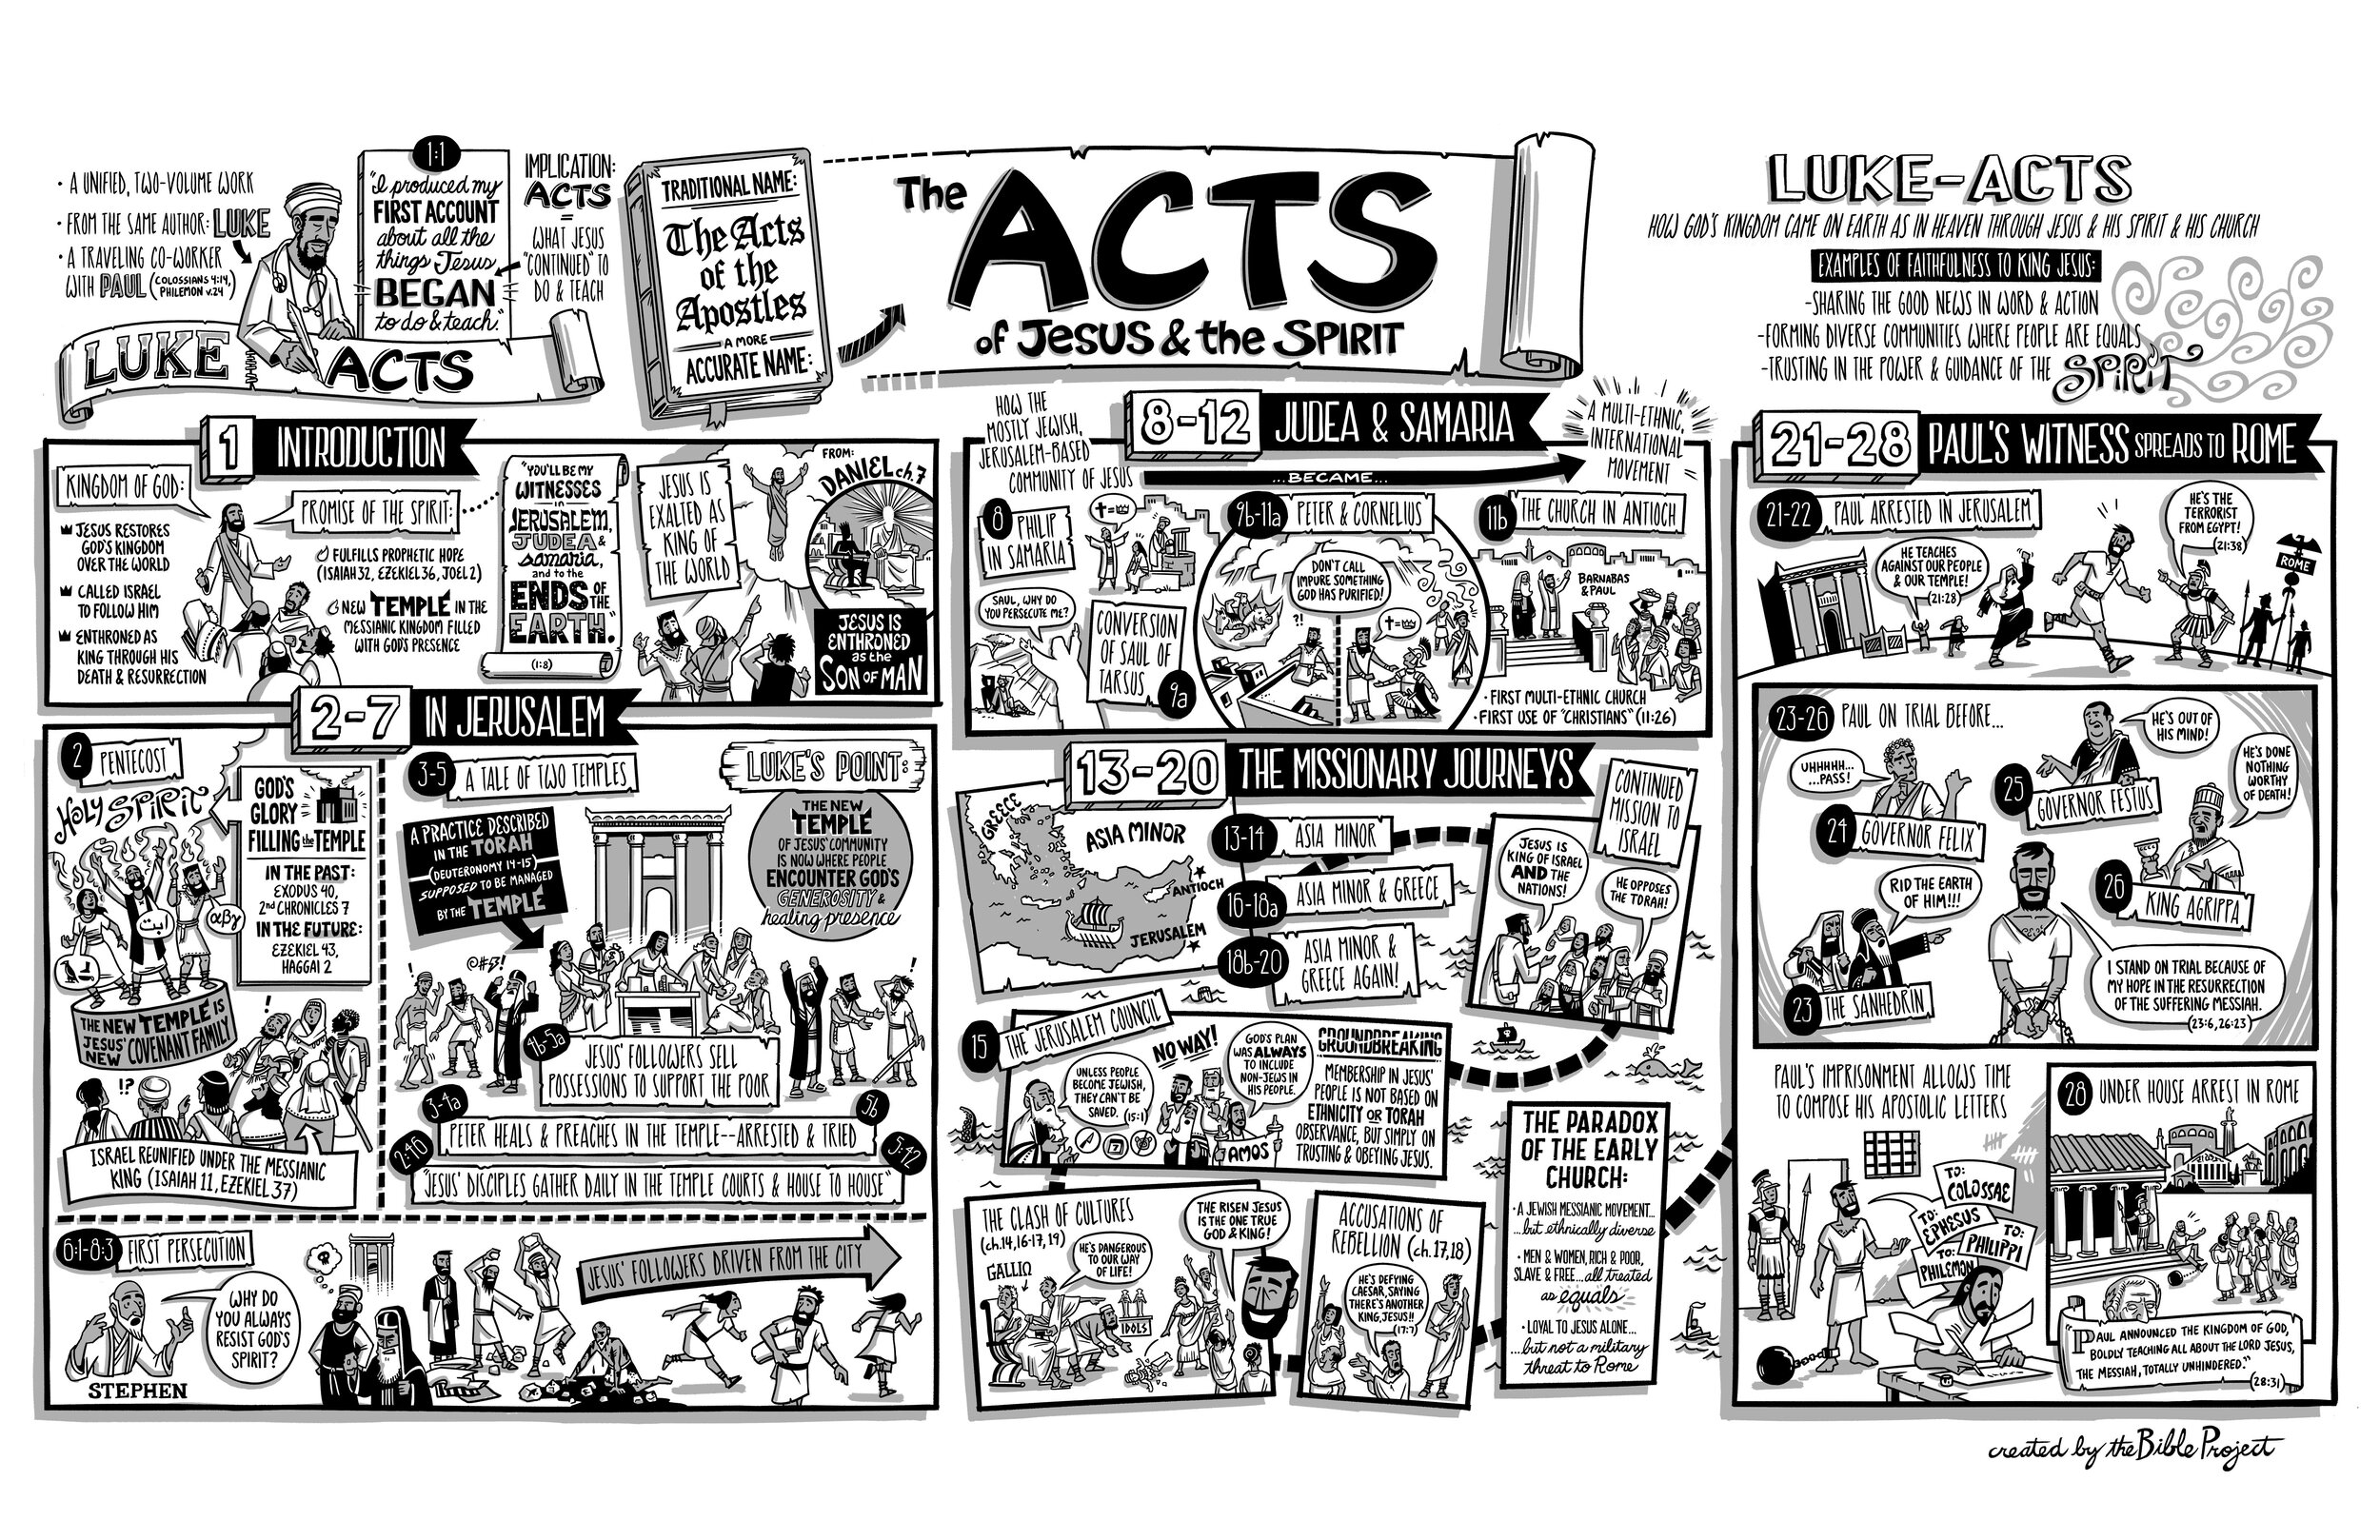 BibleProject: Acts (Video)